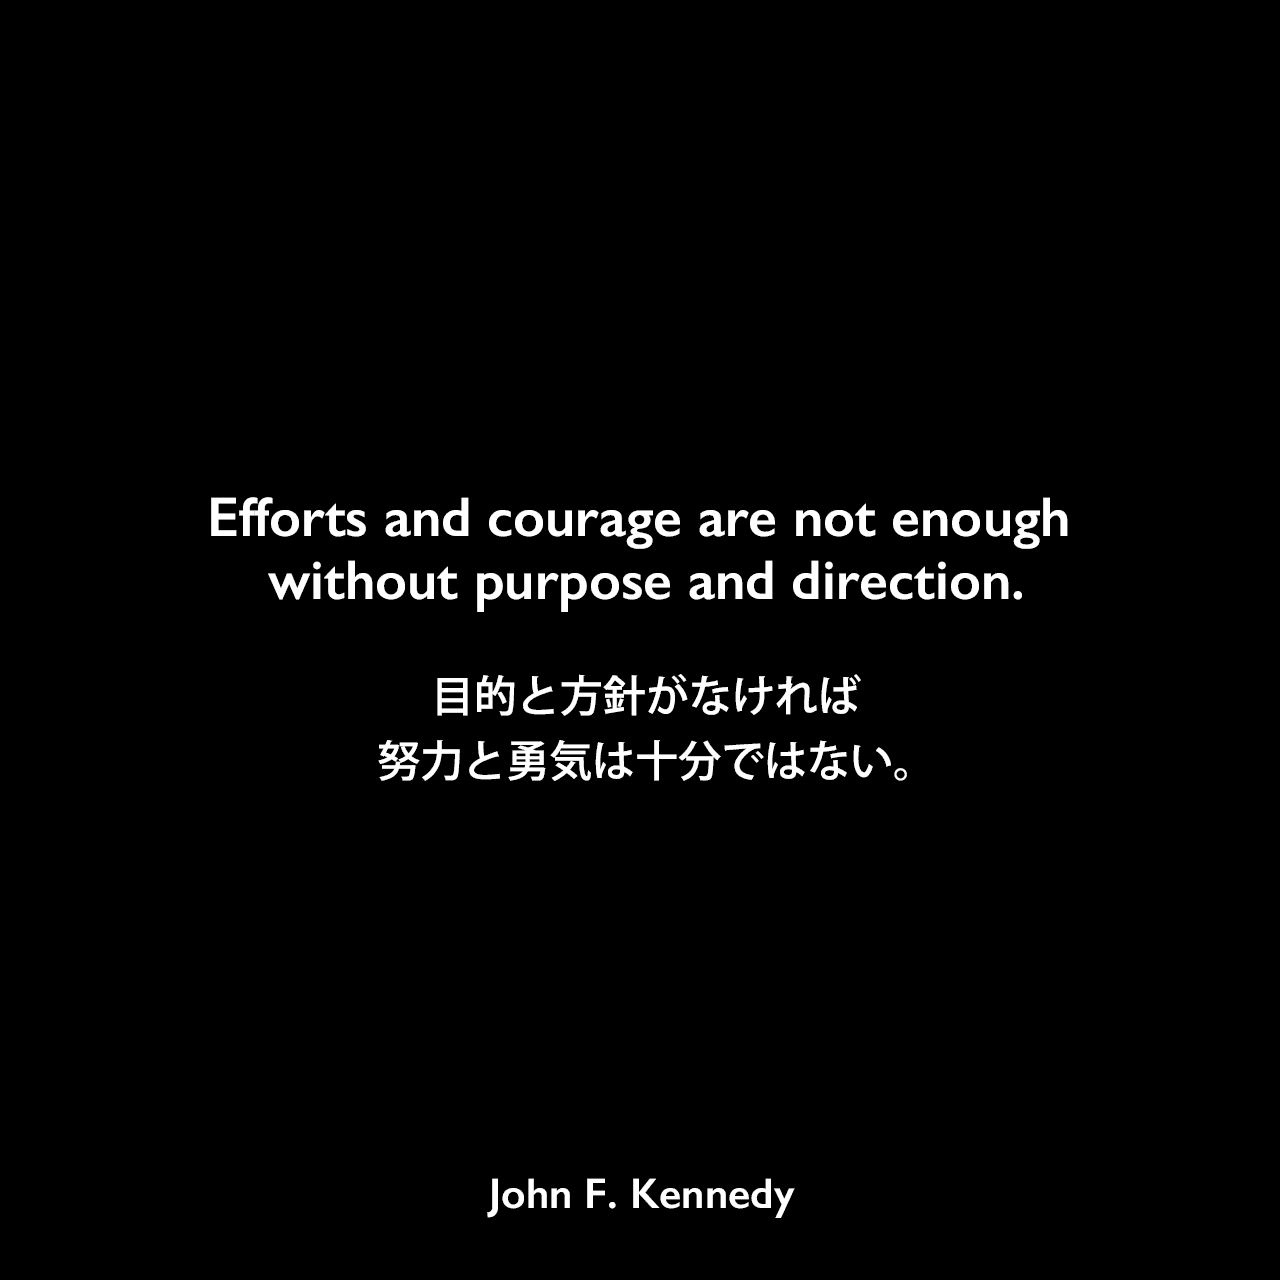 Efforts and courage are not enough without purpose and direction.目的と方針がなければ、努力と勇気は十分ではない。- ノースカロライナ州ローリーでのスピーチよりJohn F Kennedy